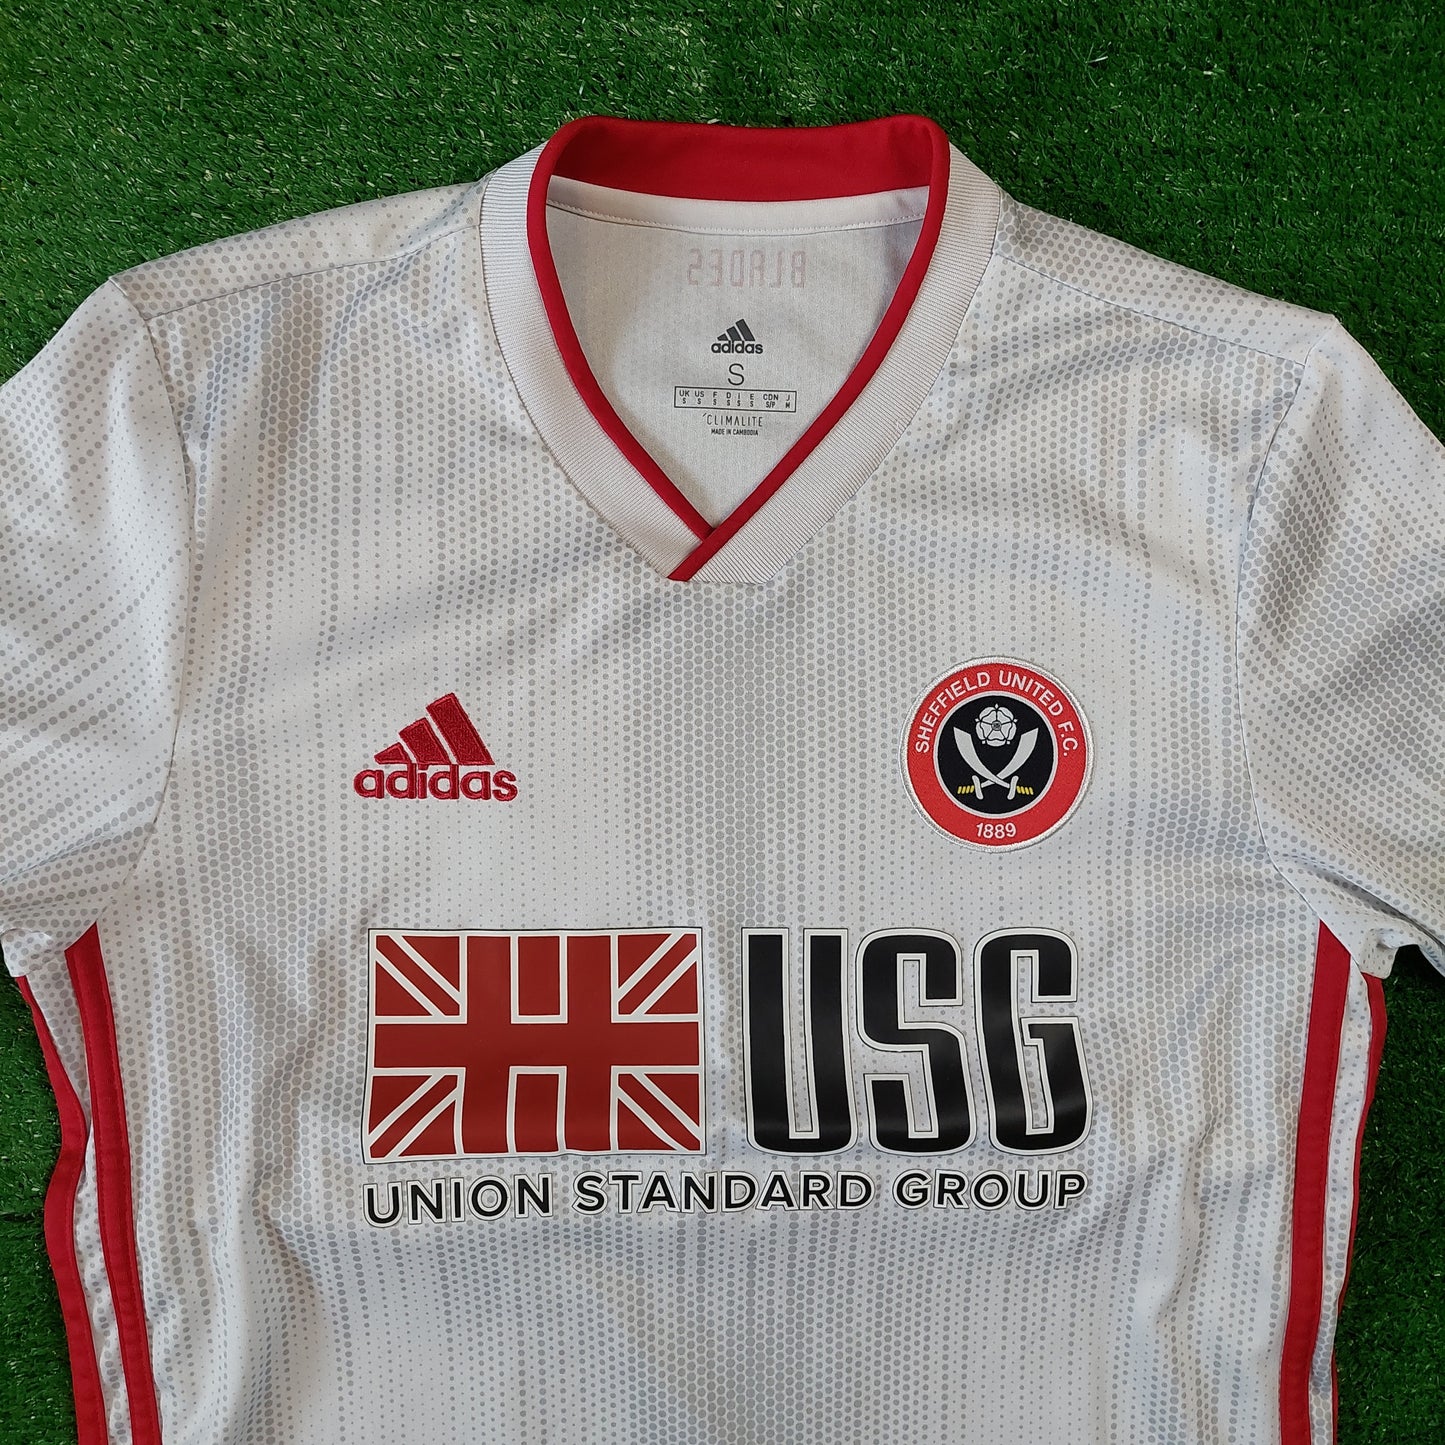 Sheffield United 2019/20 Away Shirt (Excellent) - Size S